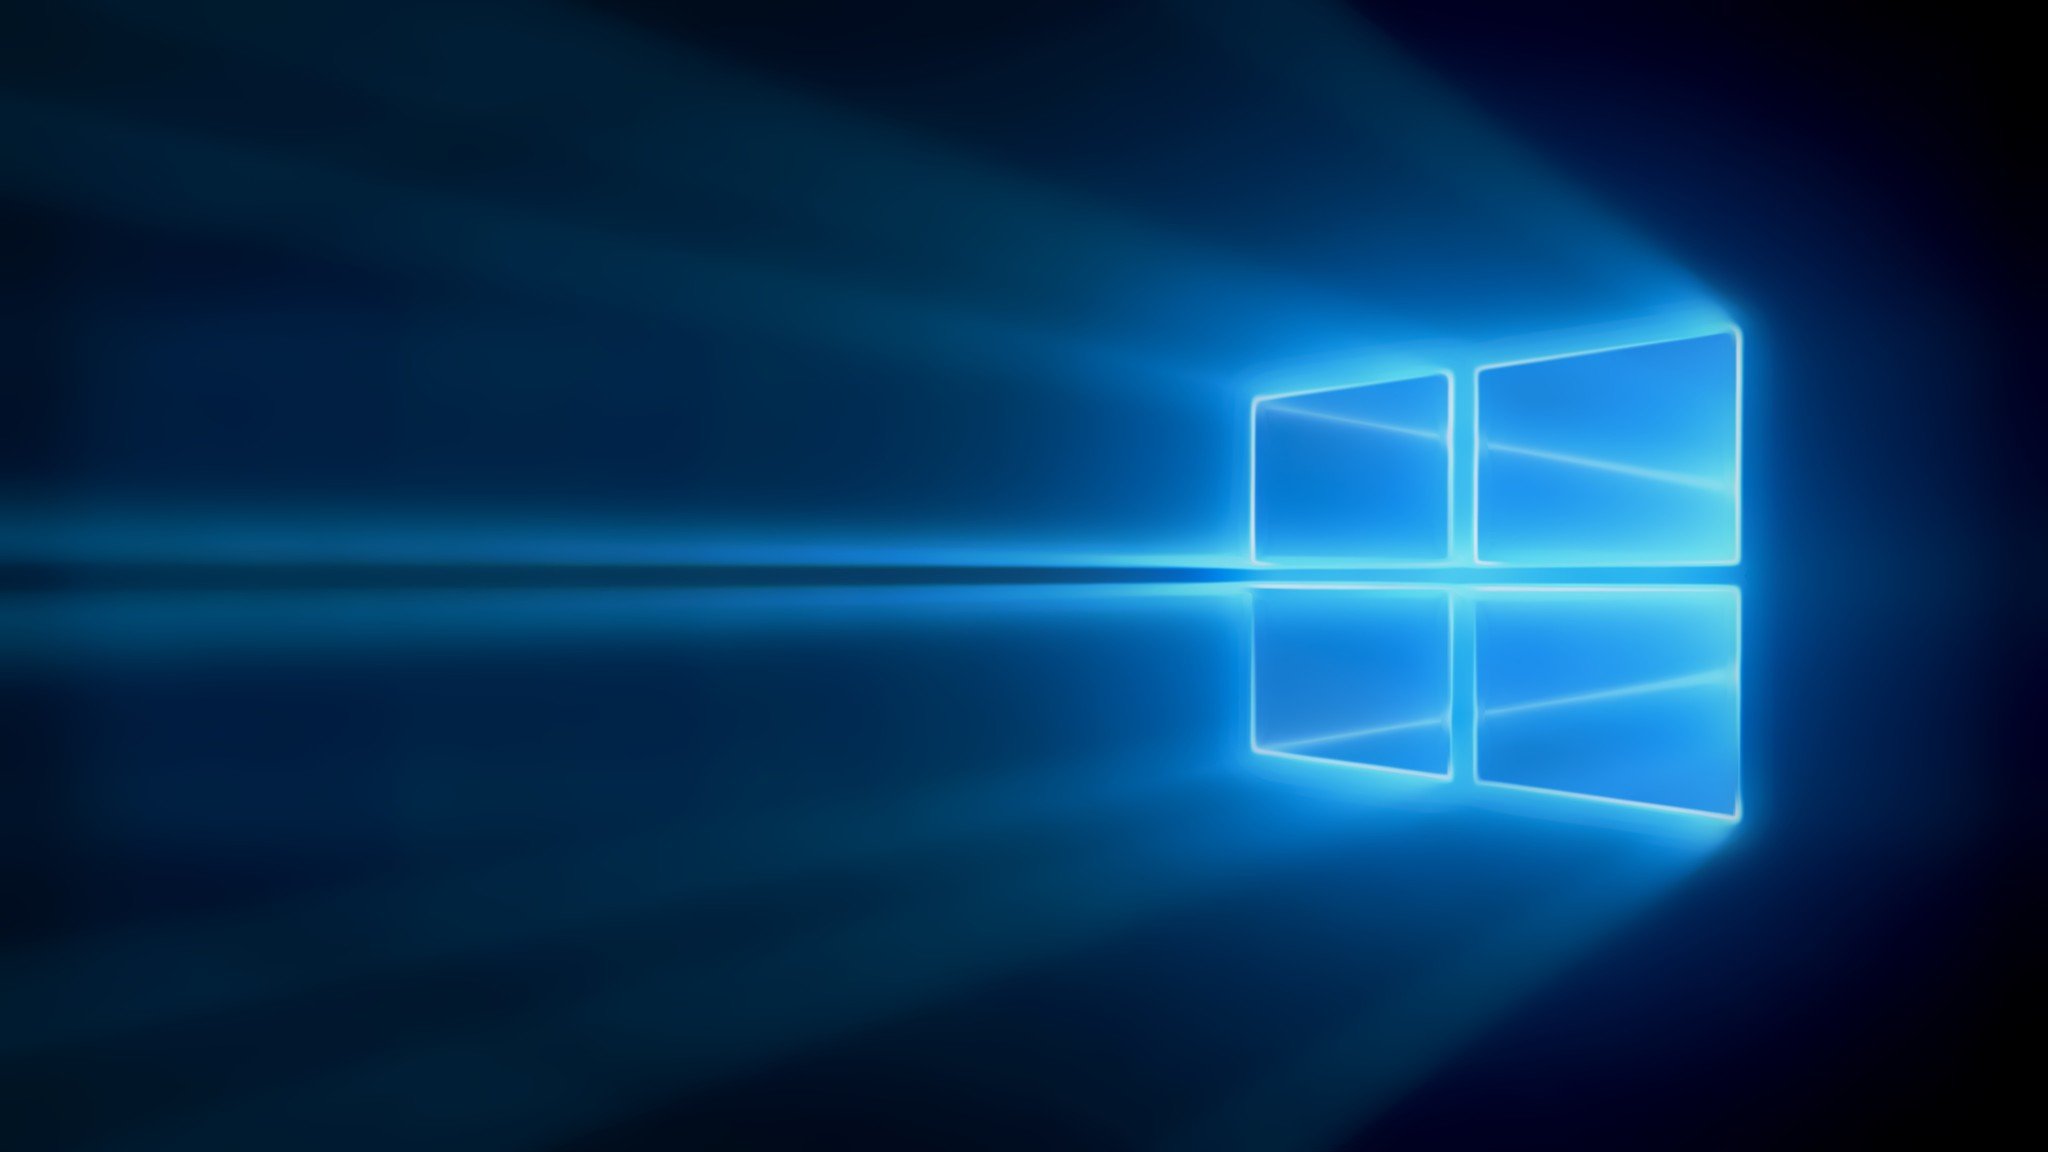 Windows 10 version 21H2 now available to all